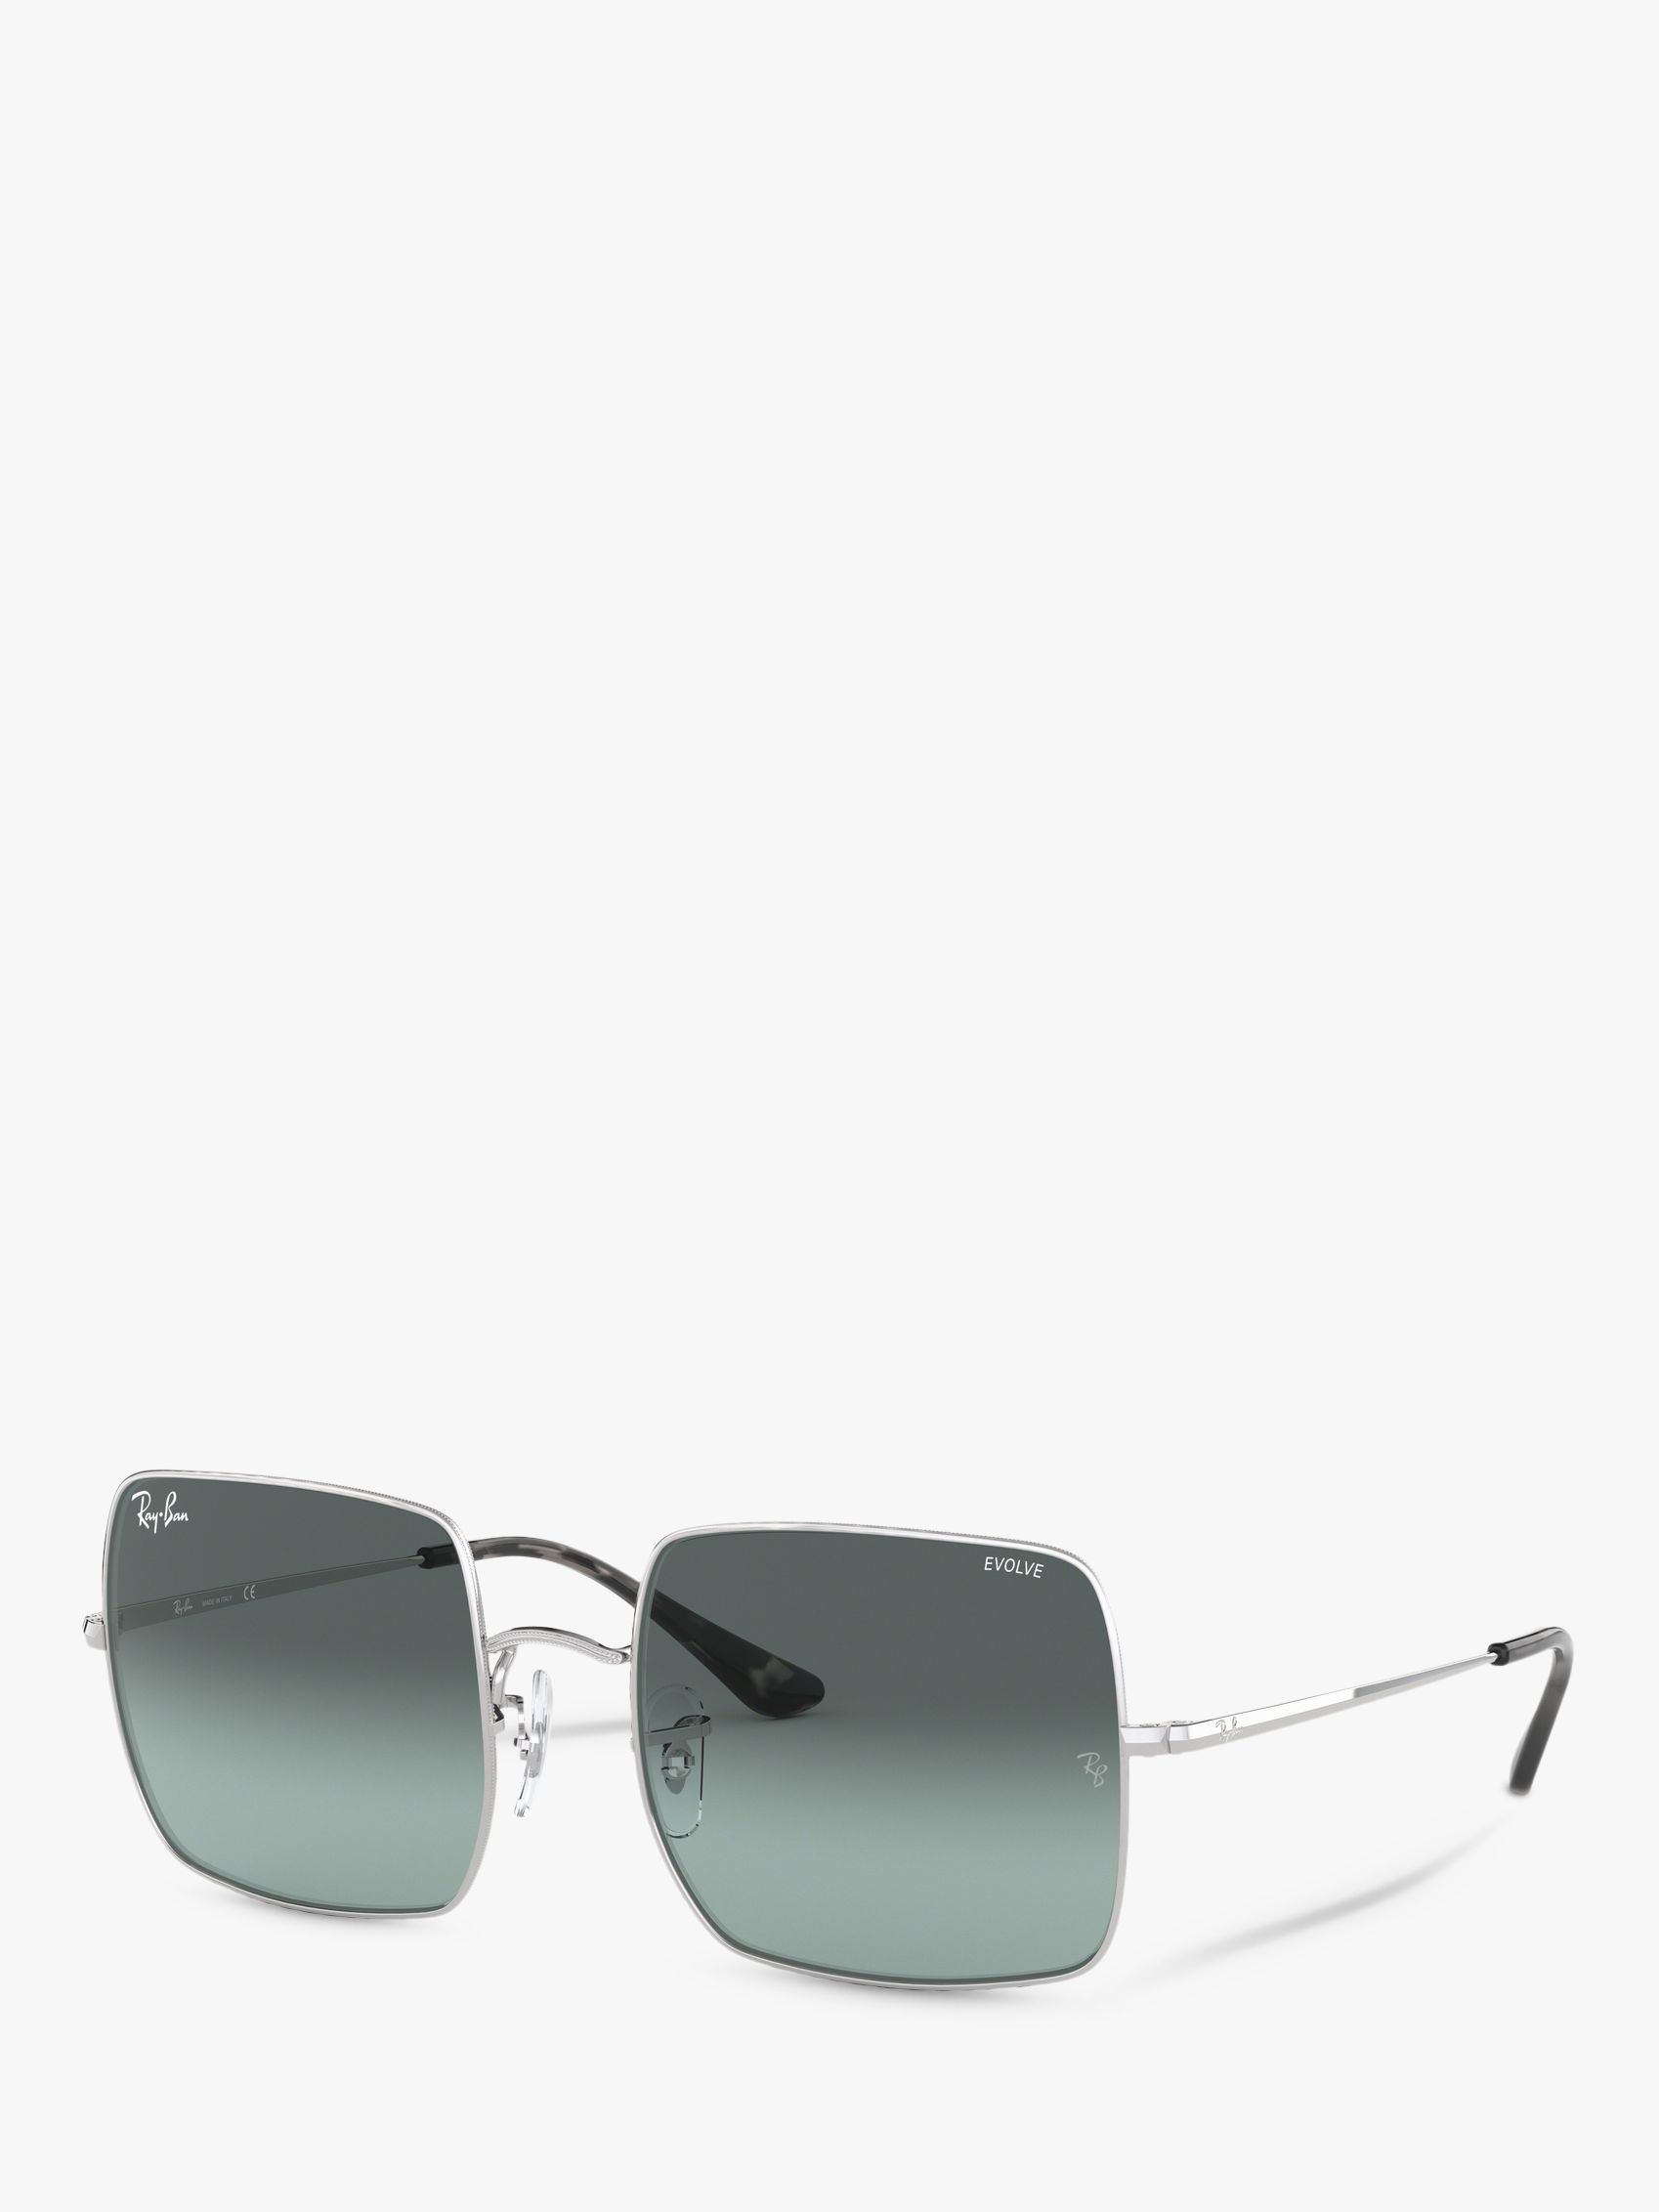 Ray-Ban RB1971 Unisex Square Sunglasses, Silver/Blue Gradient